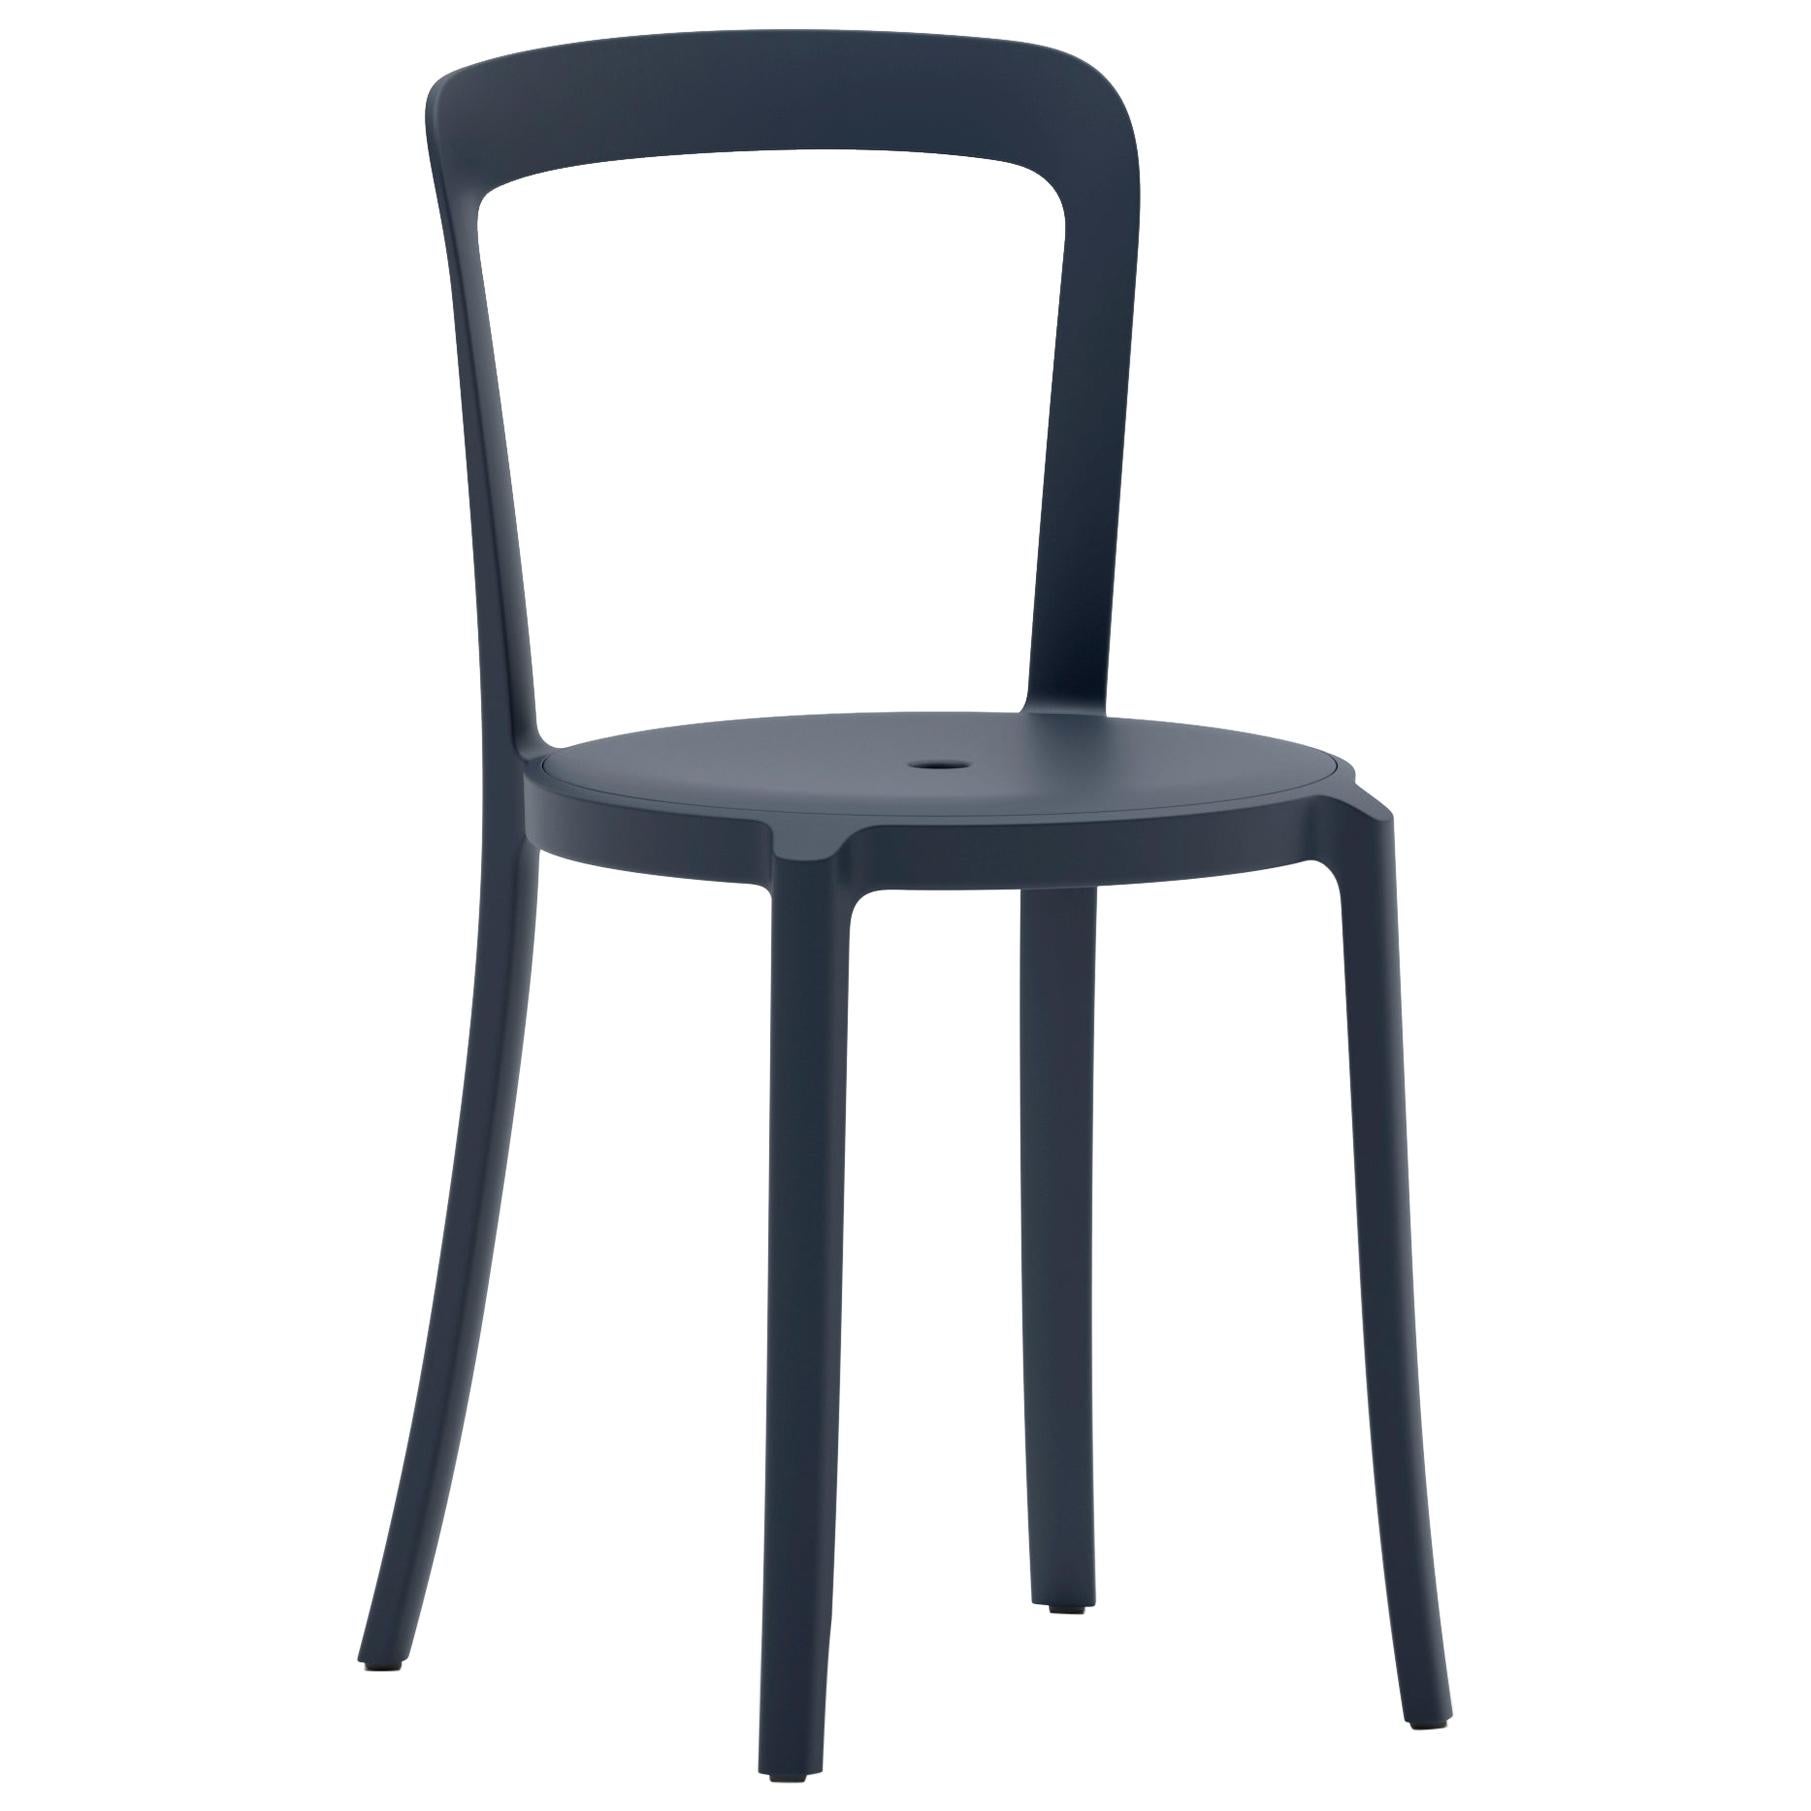 Emeco On & On Stacking Chair in Dark Blue Plastic by Barber & Osgerby For Sale